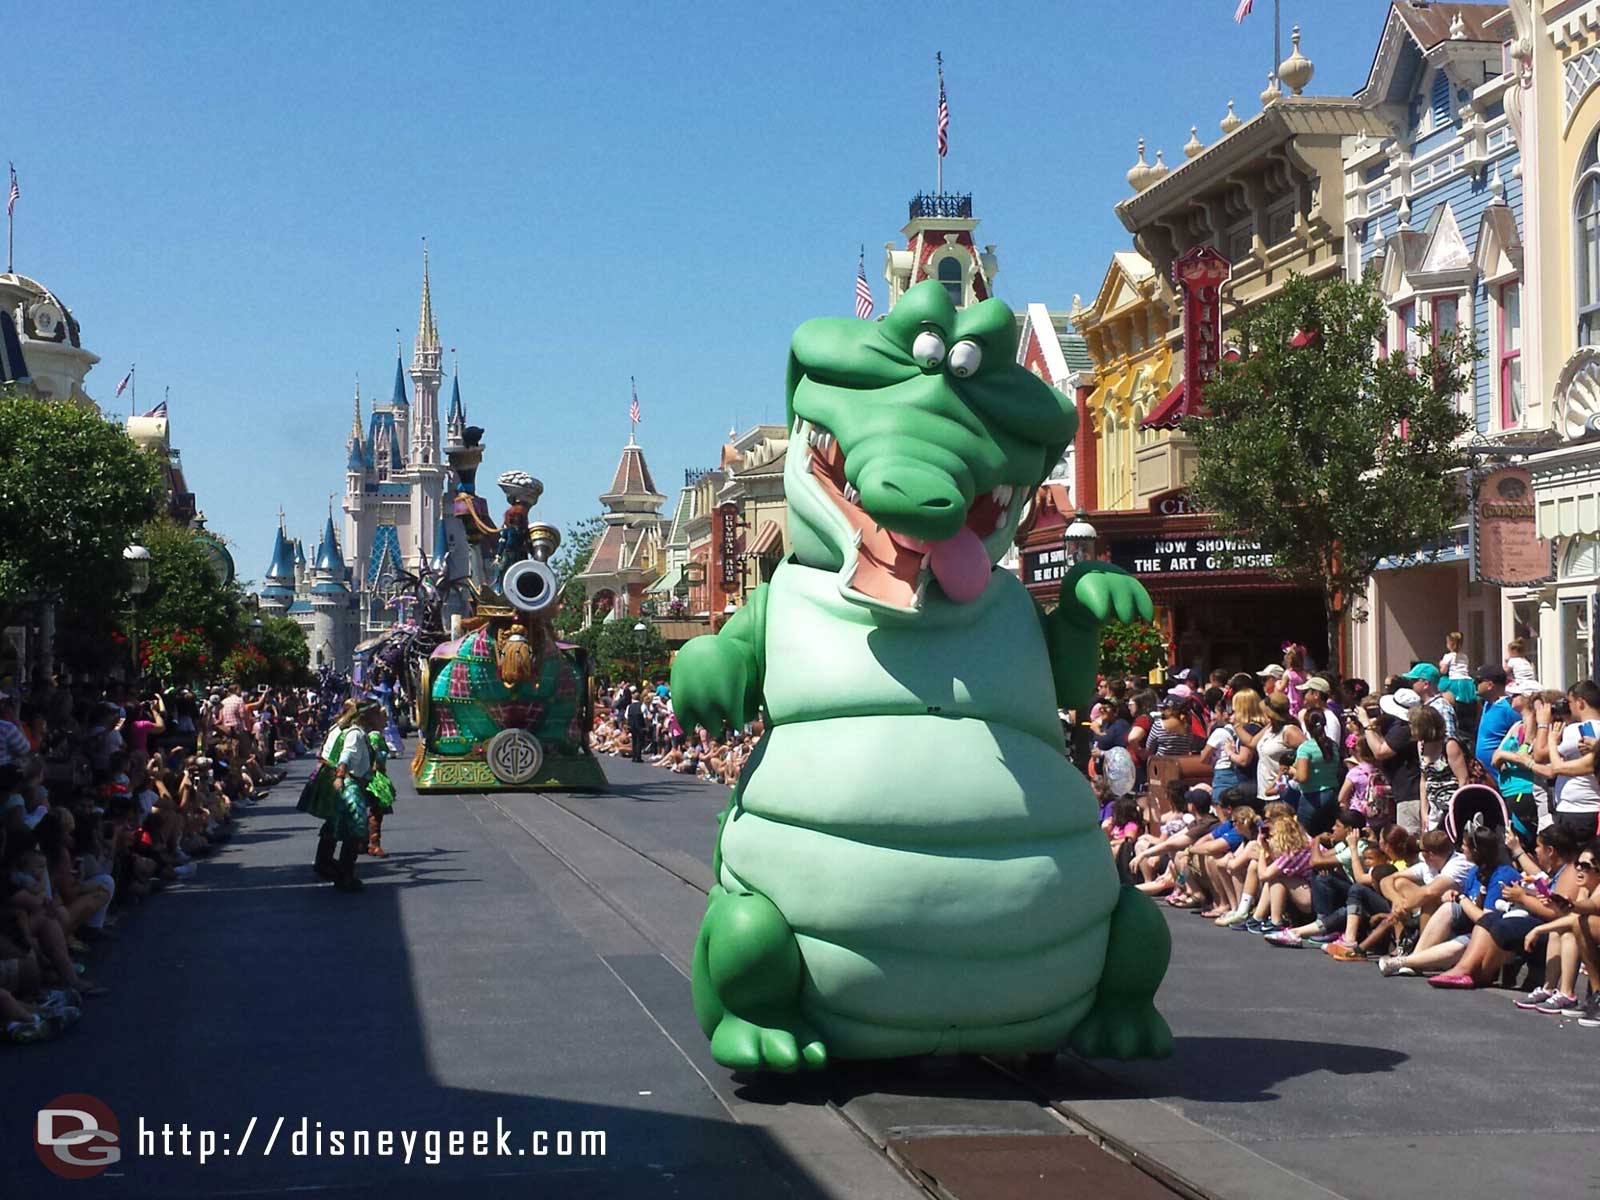 Tick-Tock in the Festival of Fantasy Parade